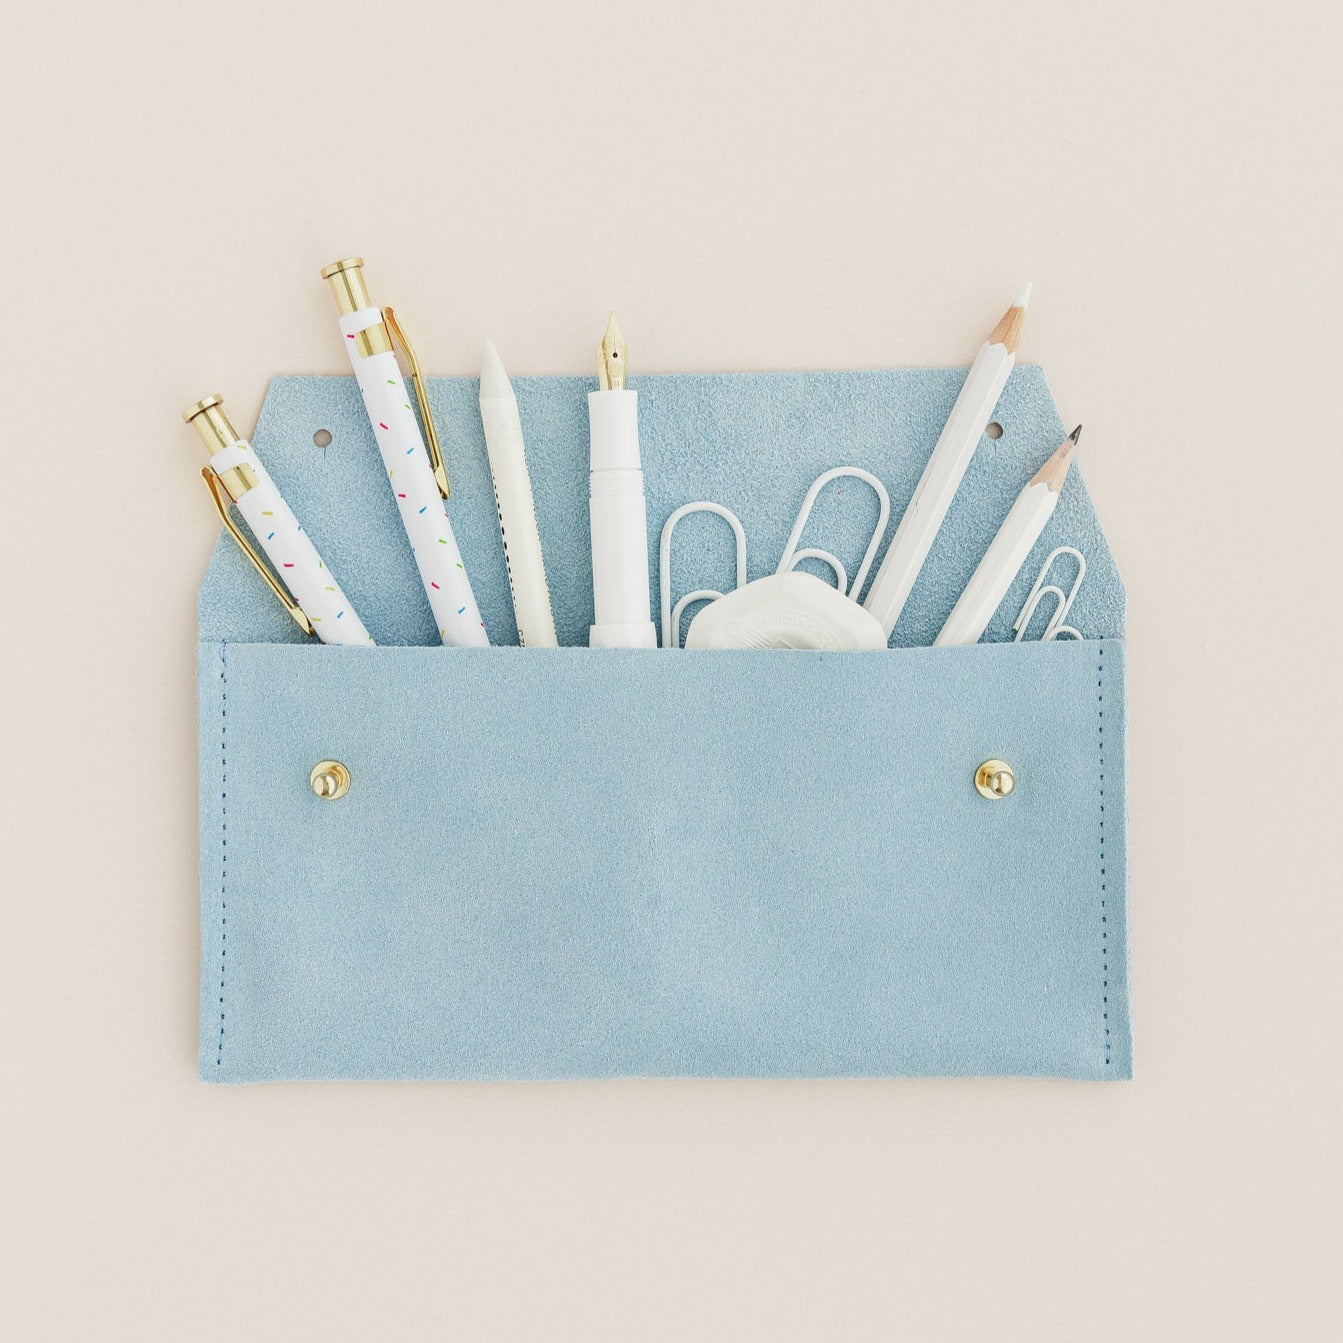 A suede pencil case in pale blue, featuring all the things you my find in a pencil case.